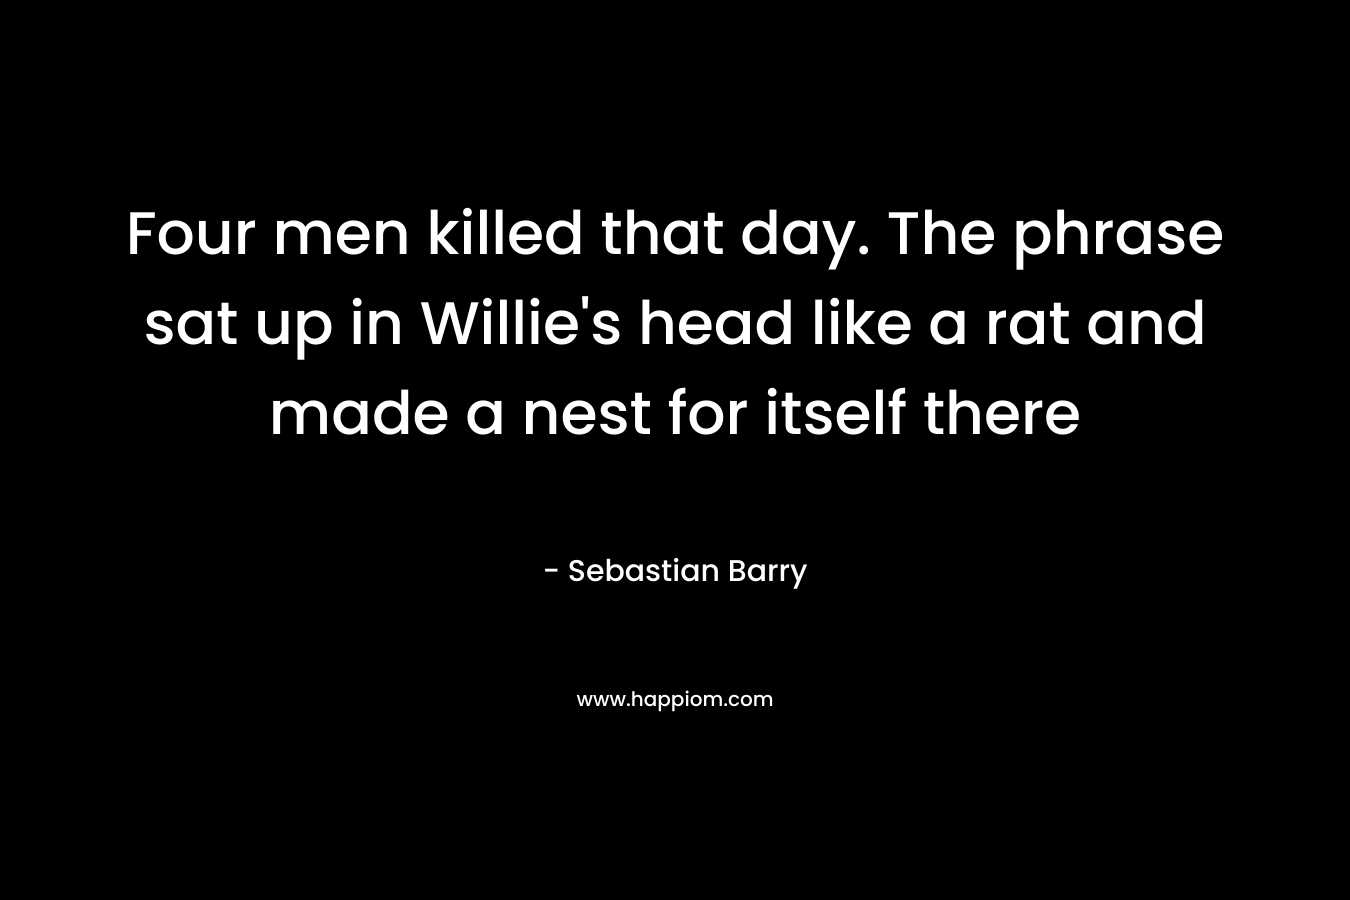 Four men killed that day. The phrase sat up in Willie's head like a rat and made a nest for itself there